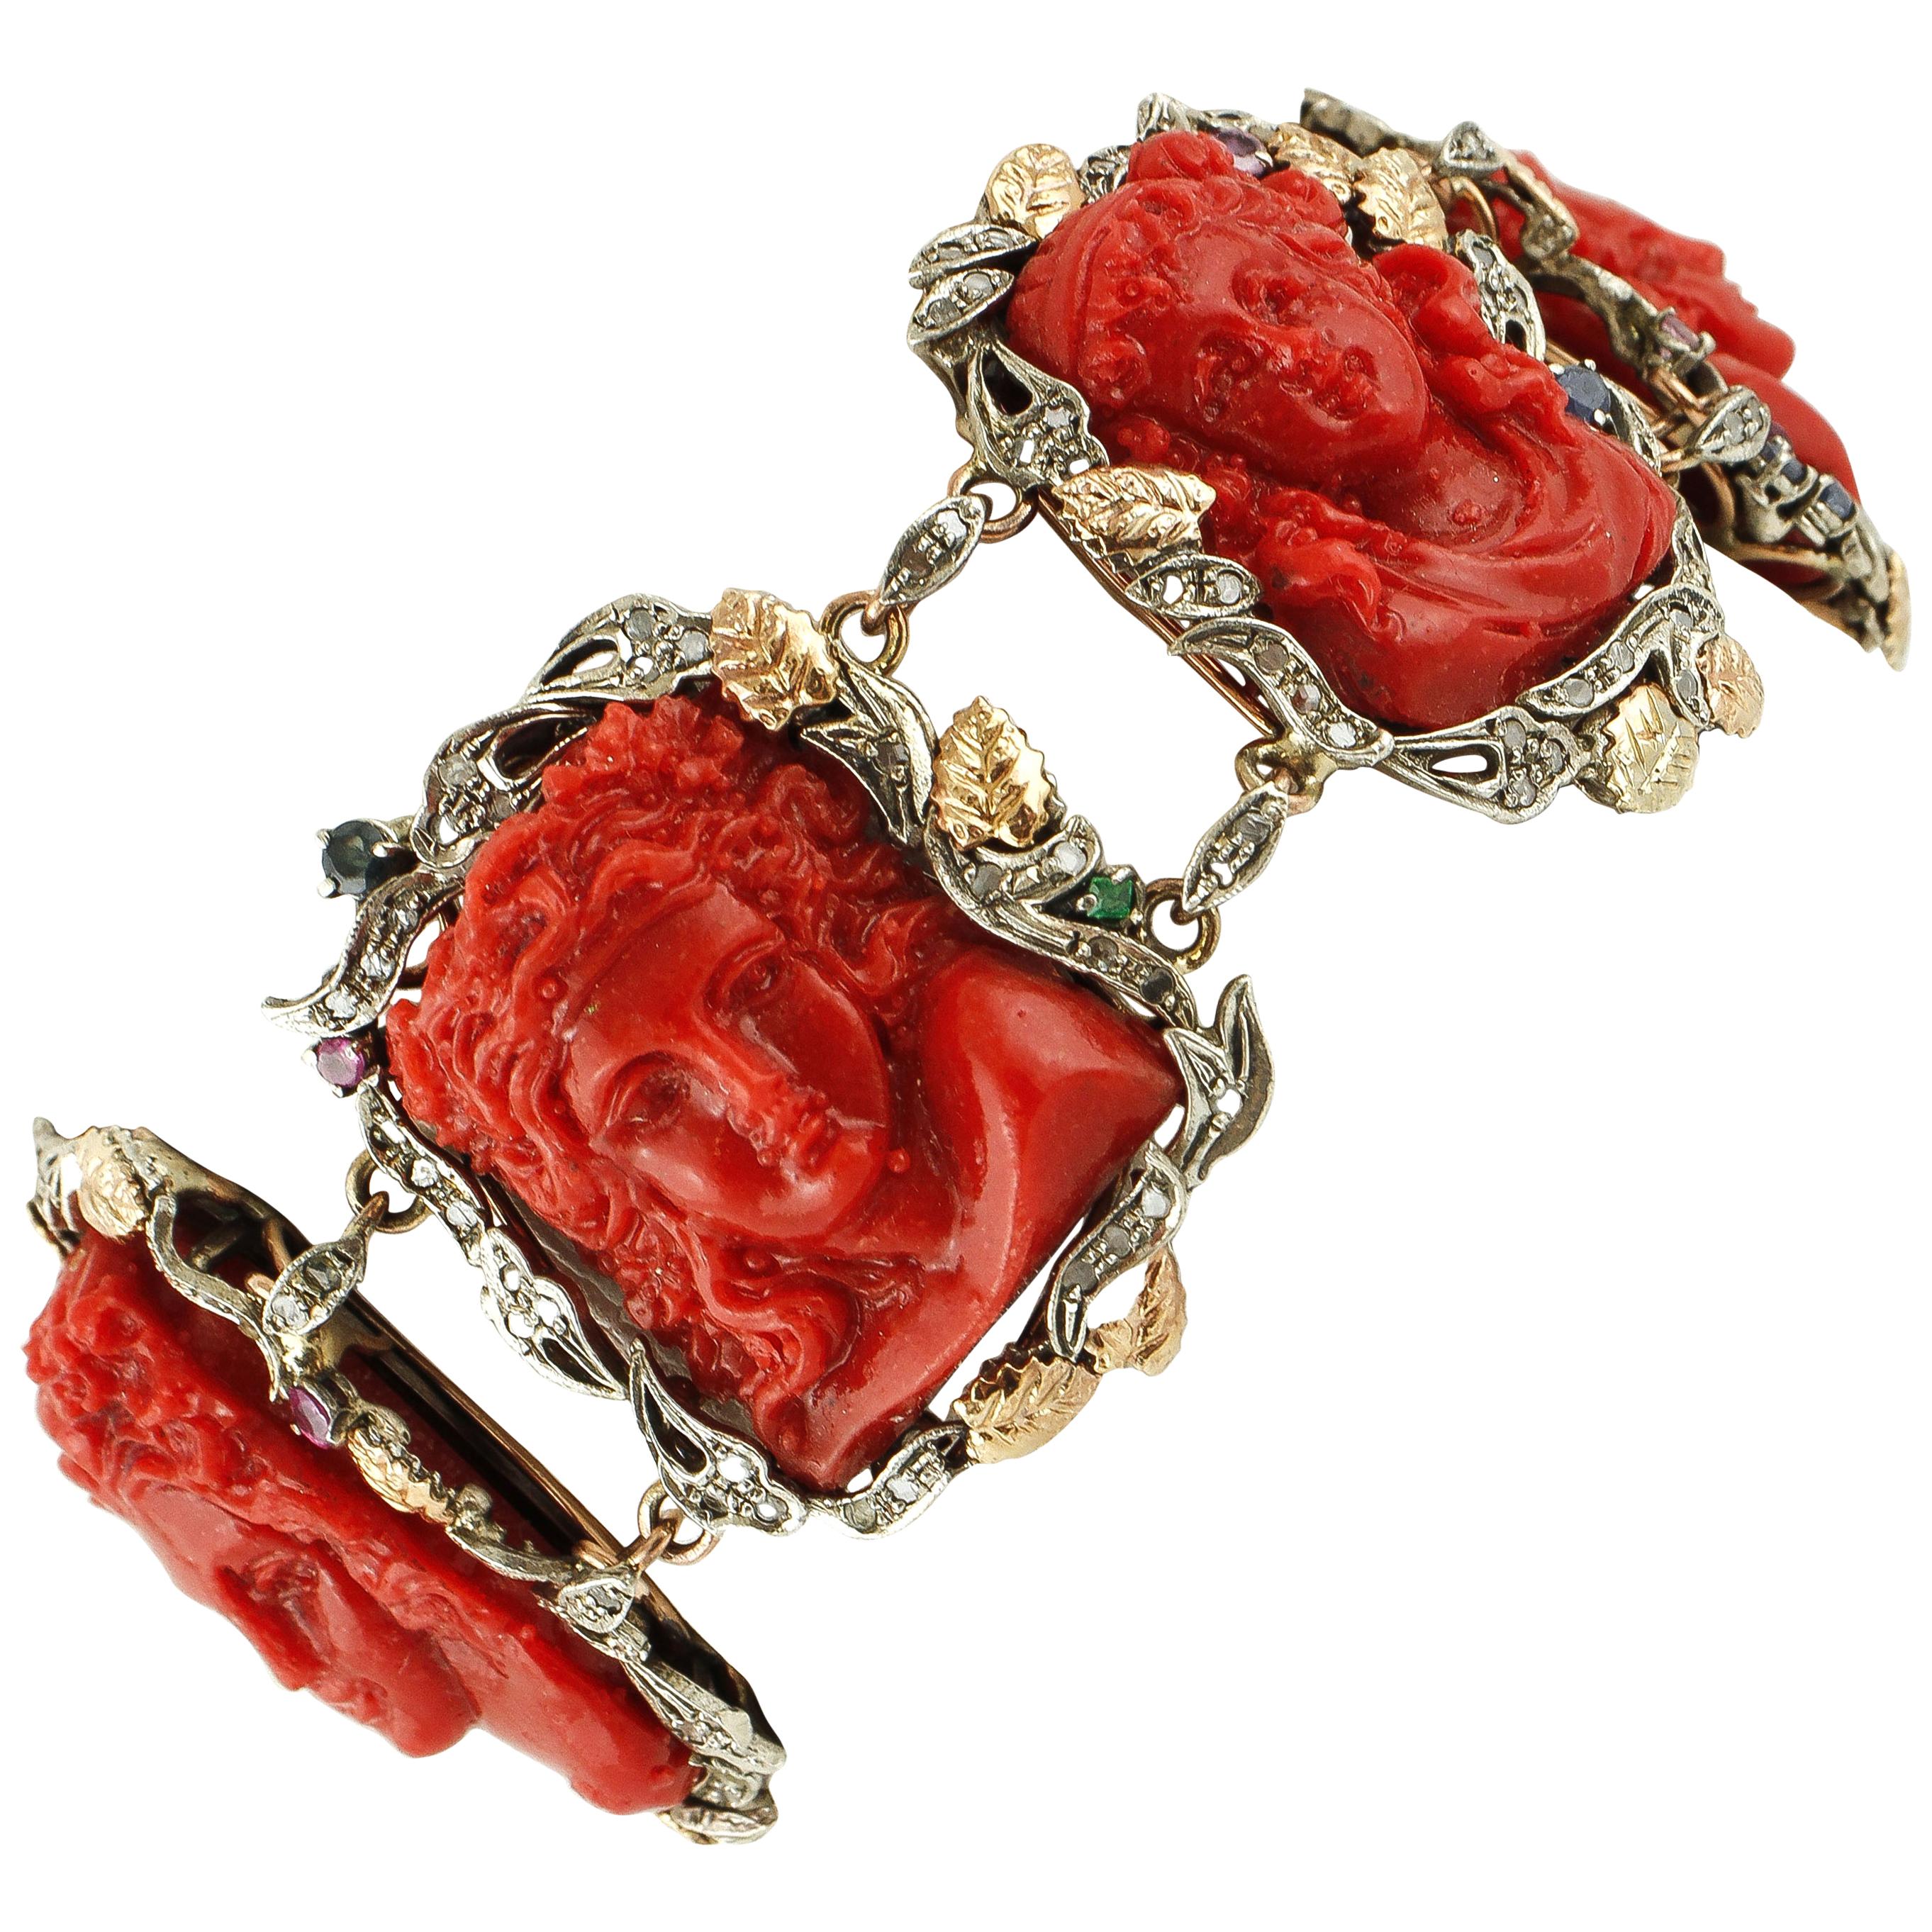 Engraved Faces on Red Coral, Diamonds, Rubies, Sapphires, Gold/Silver  Bracelet